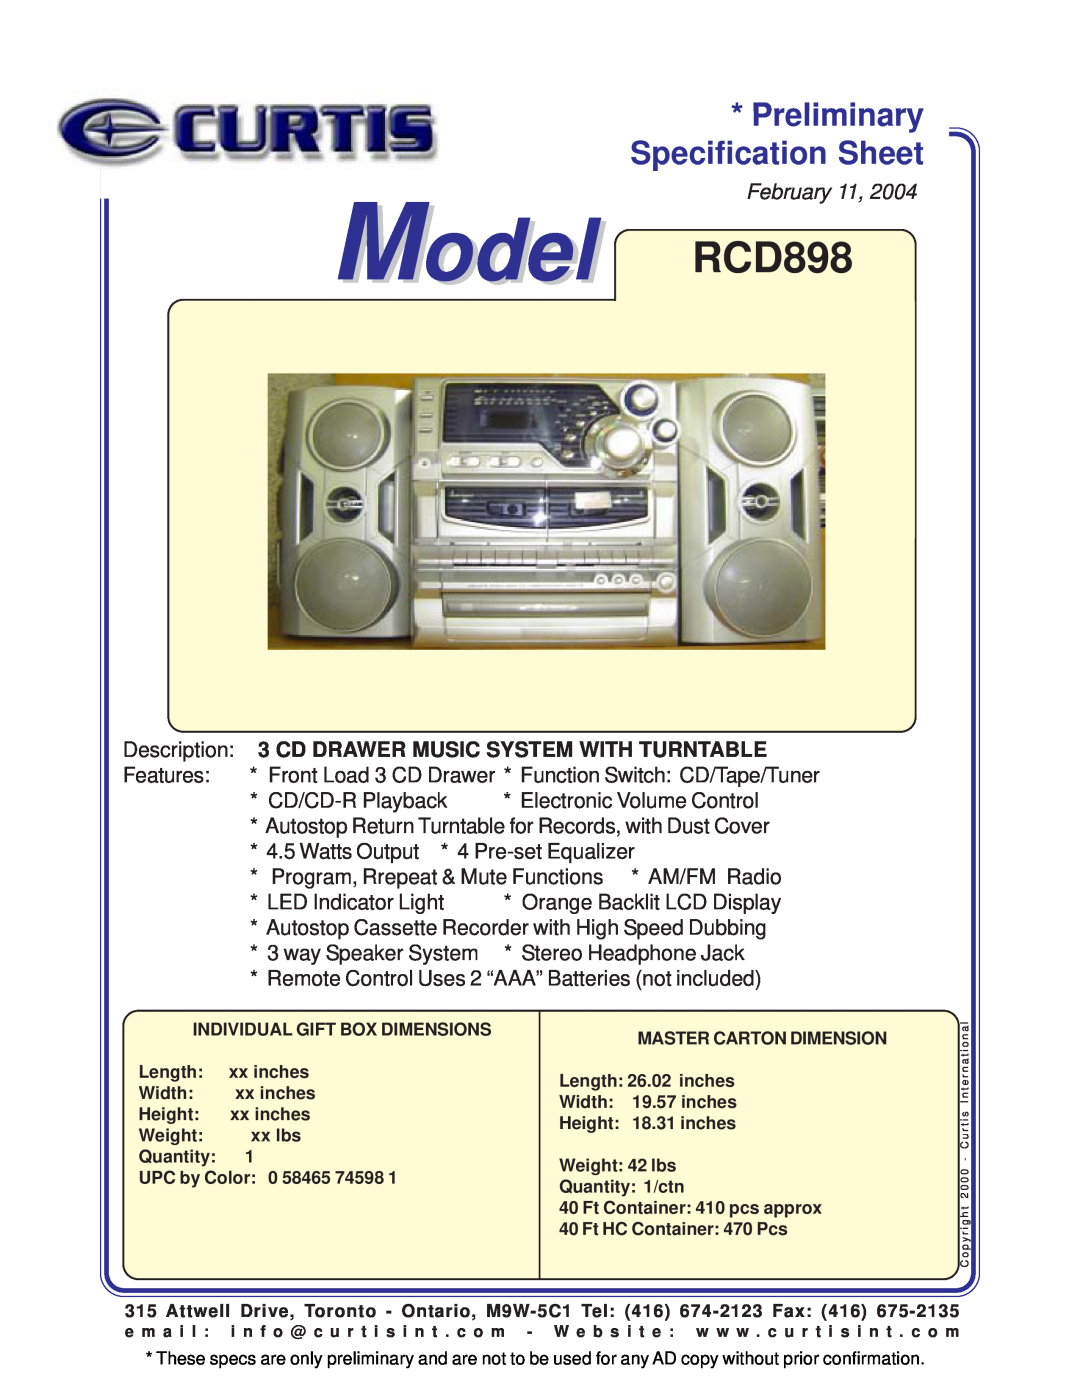 Curtis specifications Specification Sheet, Model RCD898, Preliminary, February 